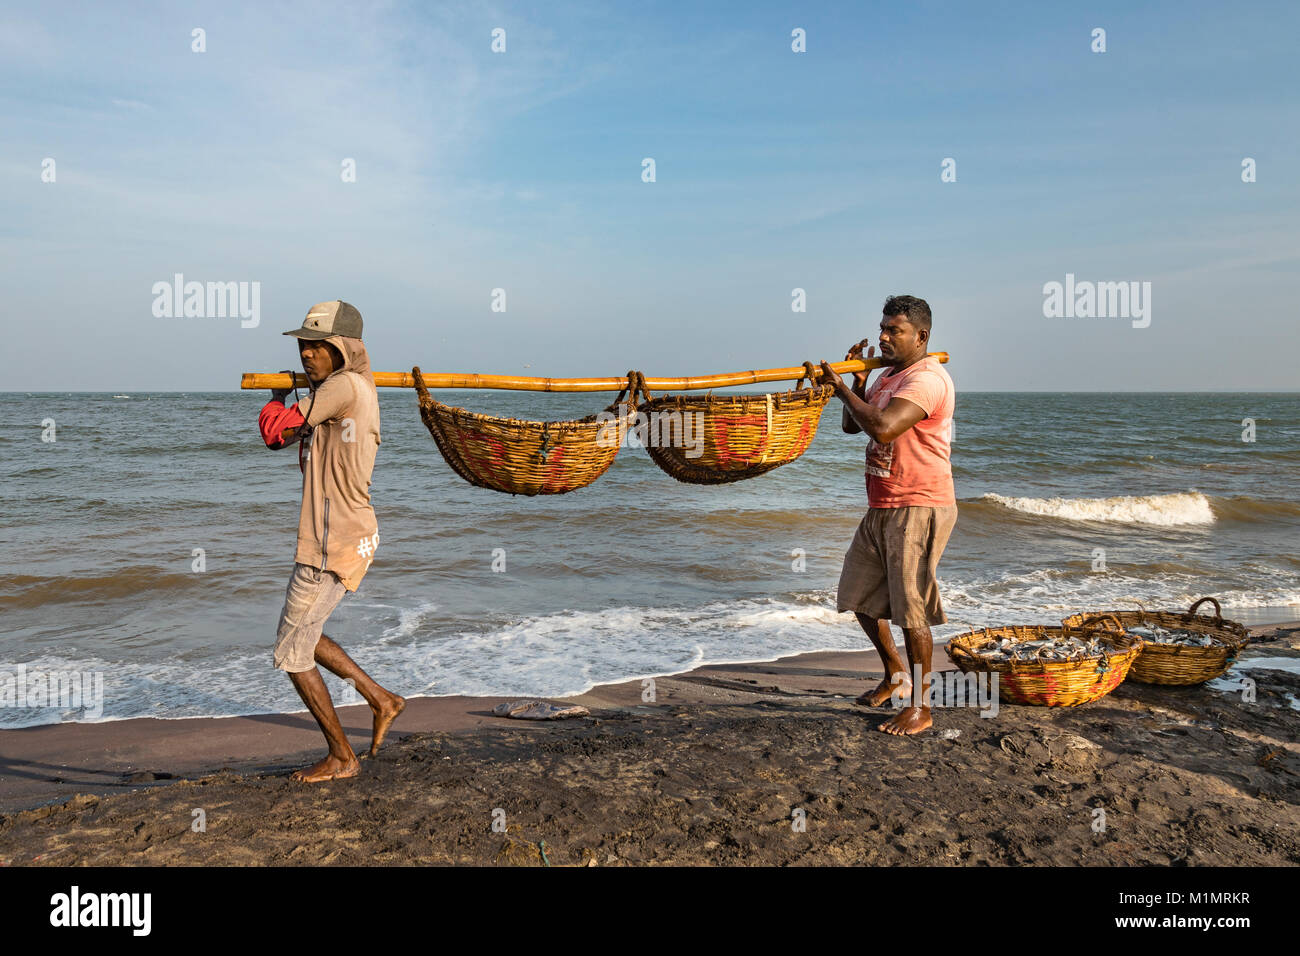 local life in working harbour in Negombo, Colombo, Western Province, Sri Lanka, Asia Stock Photo